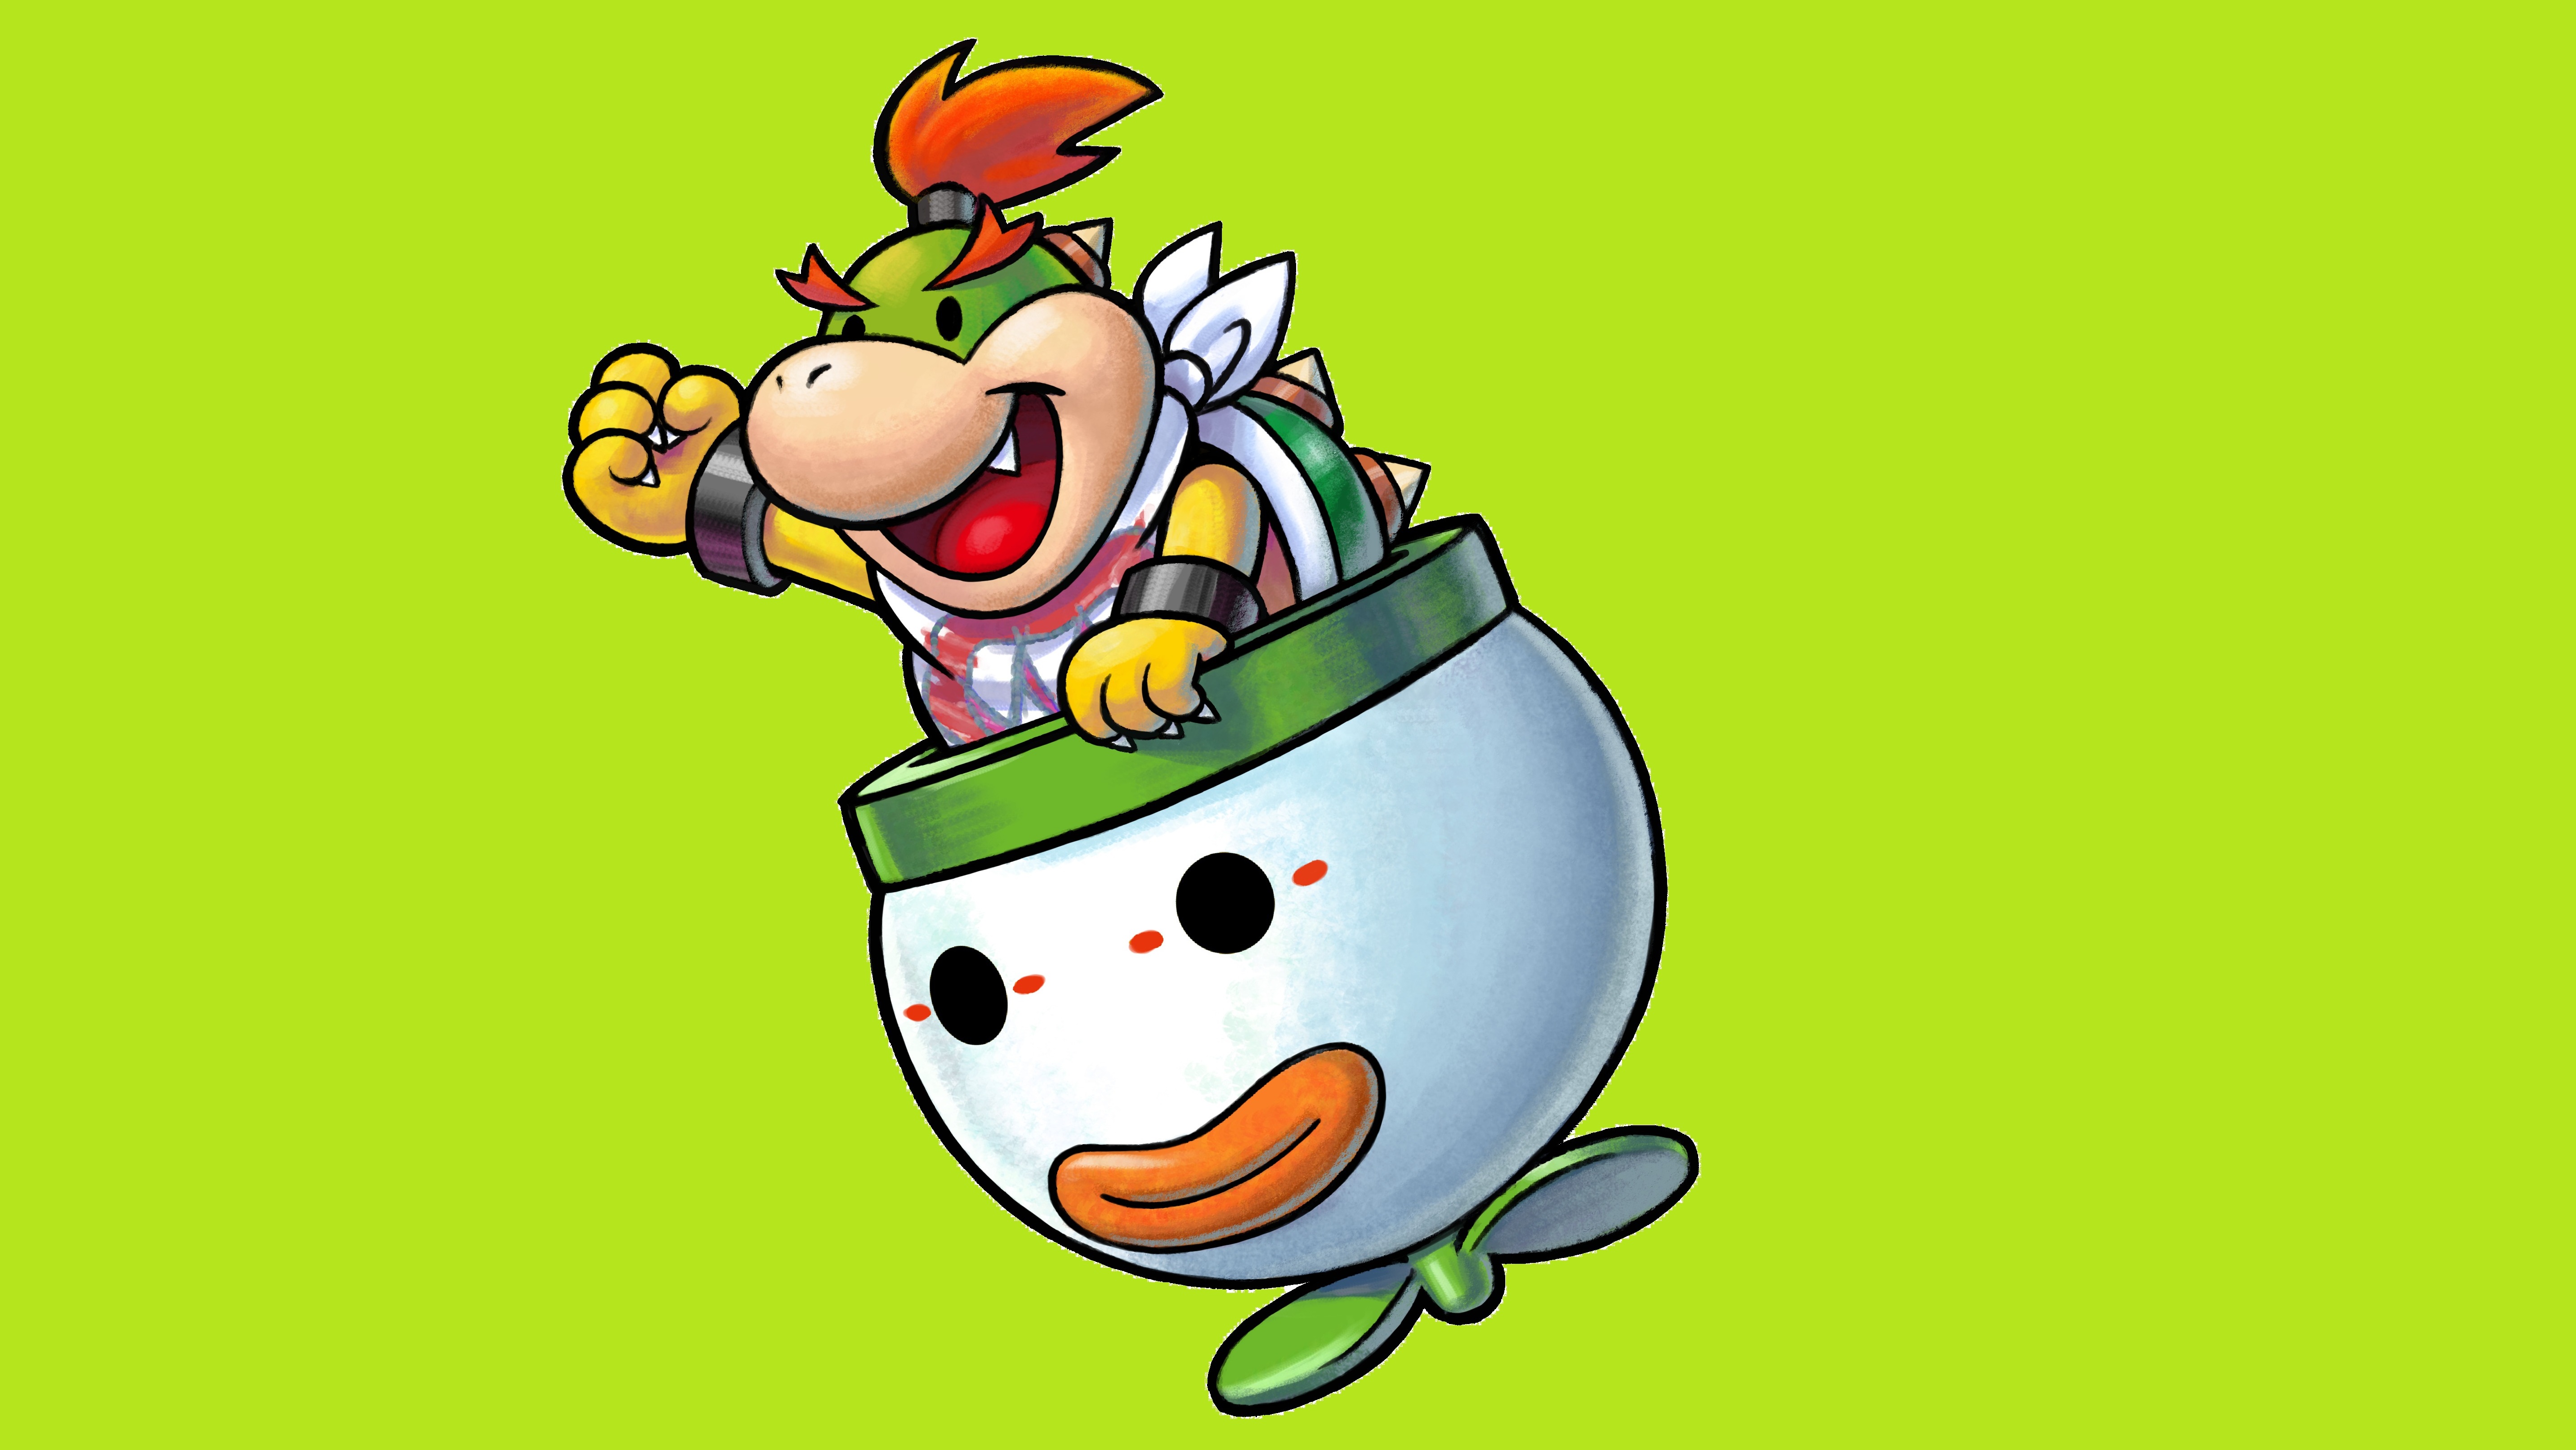 Super Mario Sunshine: Why Does Bowser Jr Think Peach is His Mother?